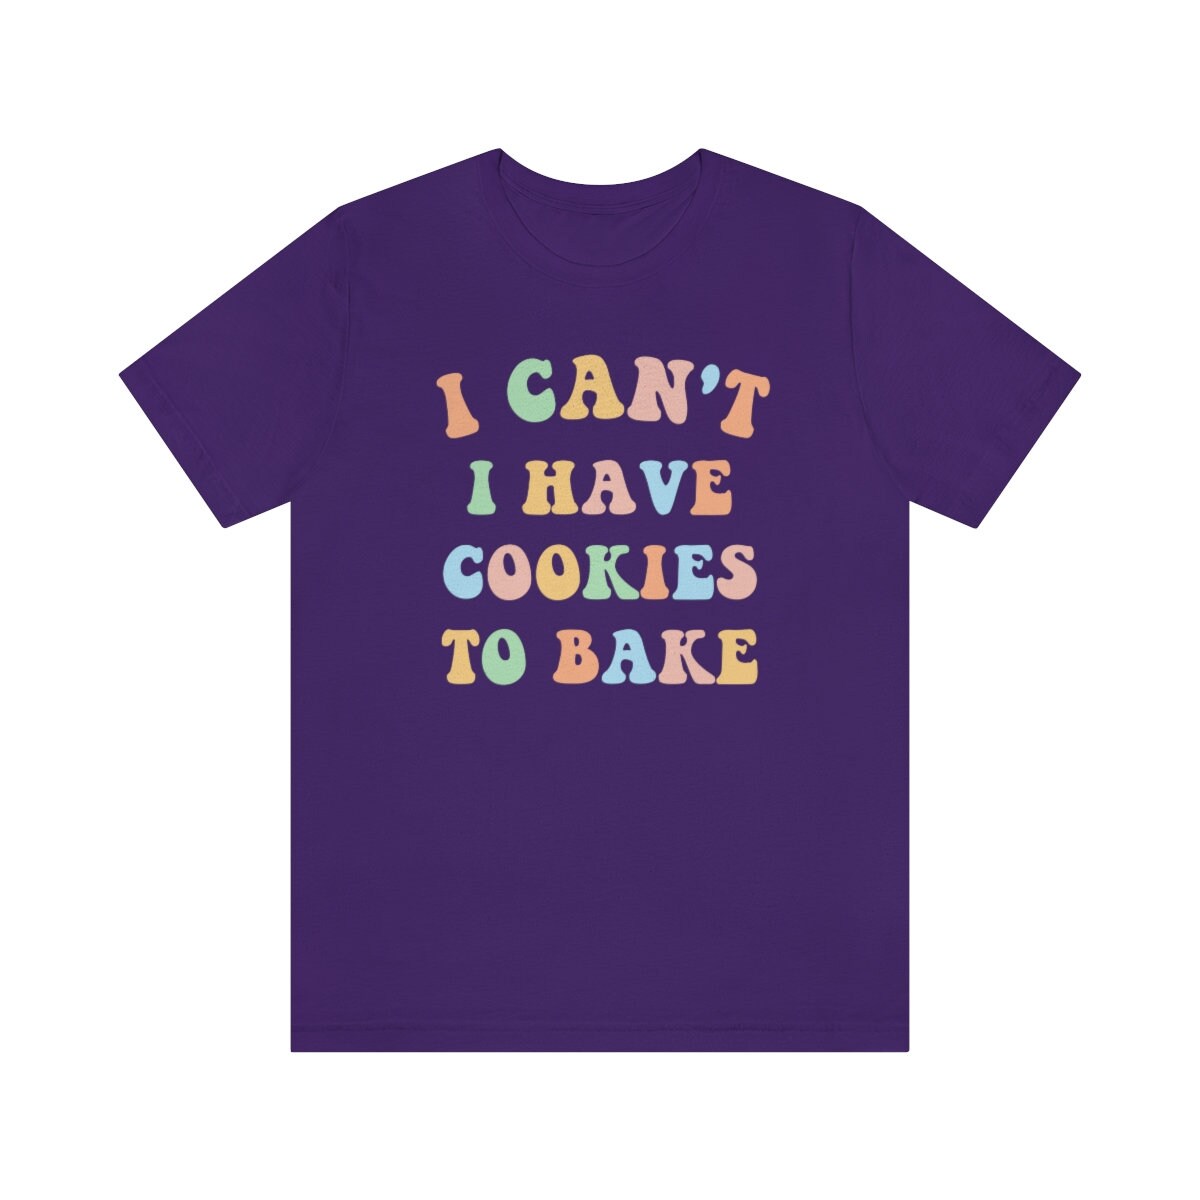 I Can't I Have Cookies To Bake, Baking Shirt for Wife or Mom - 37 Design Unit